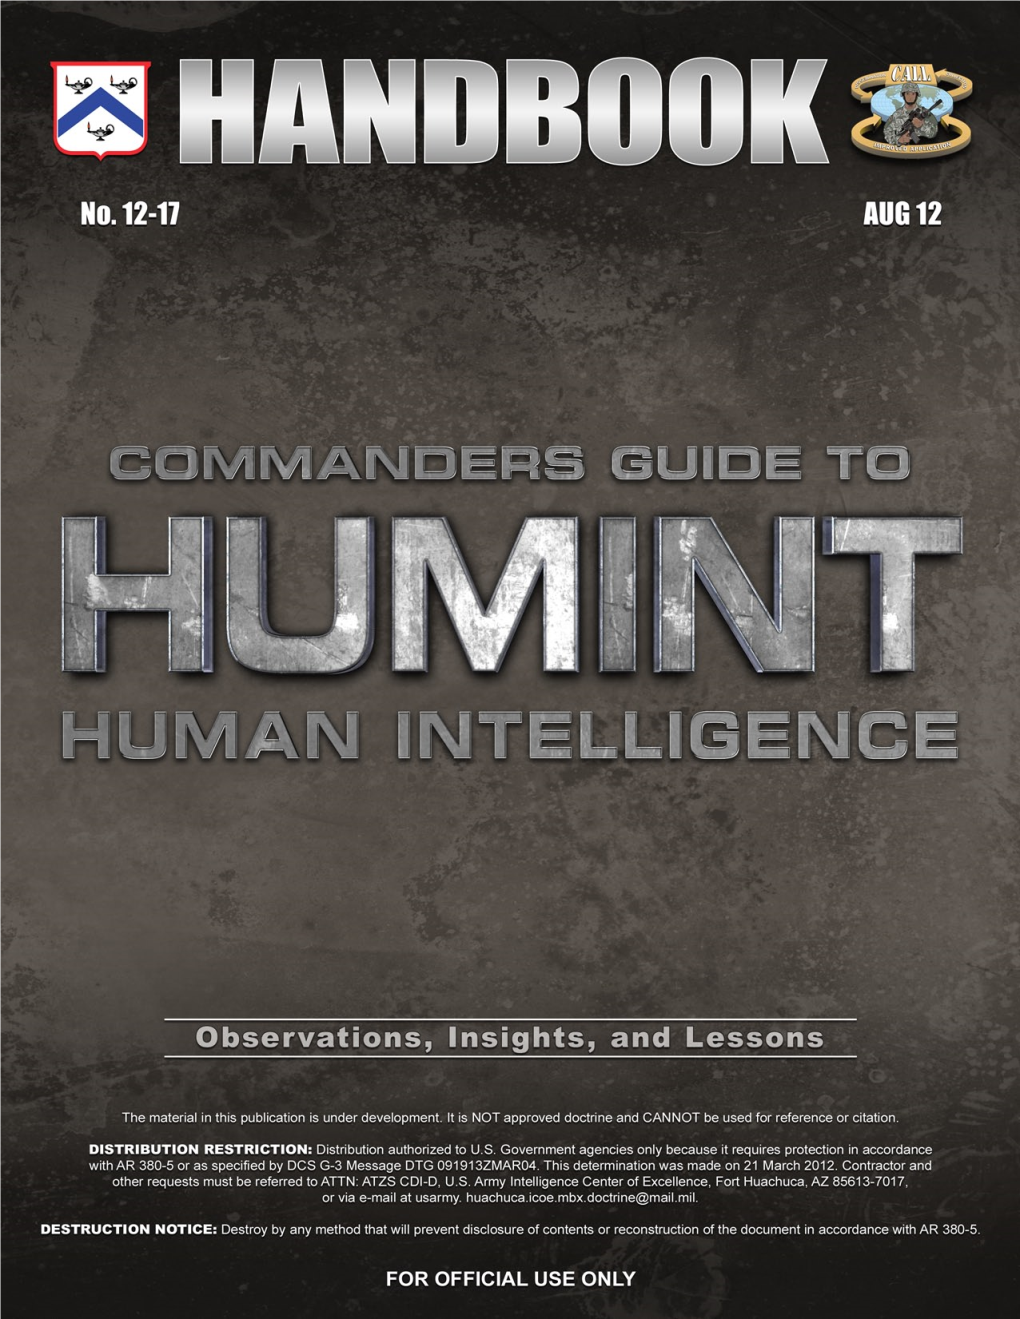 Commanders Guide to Human Intelligence (HUMINT)